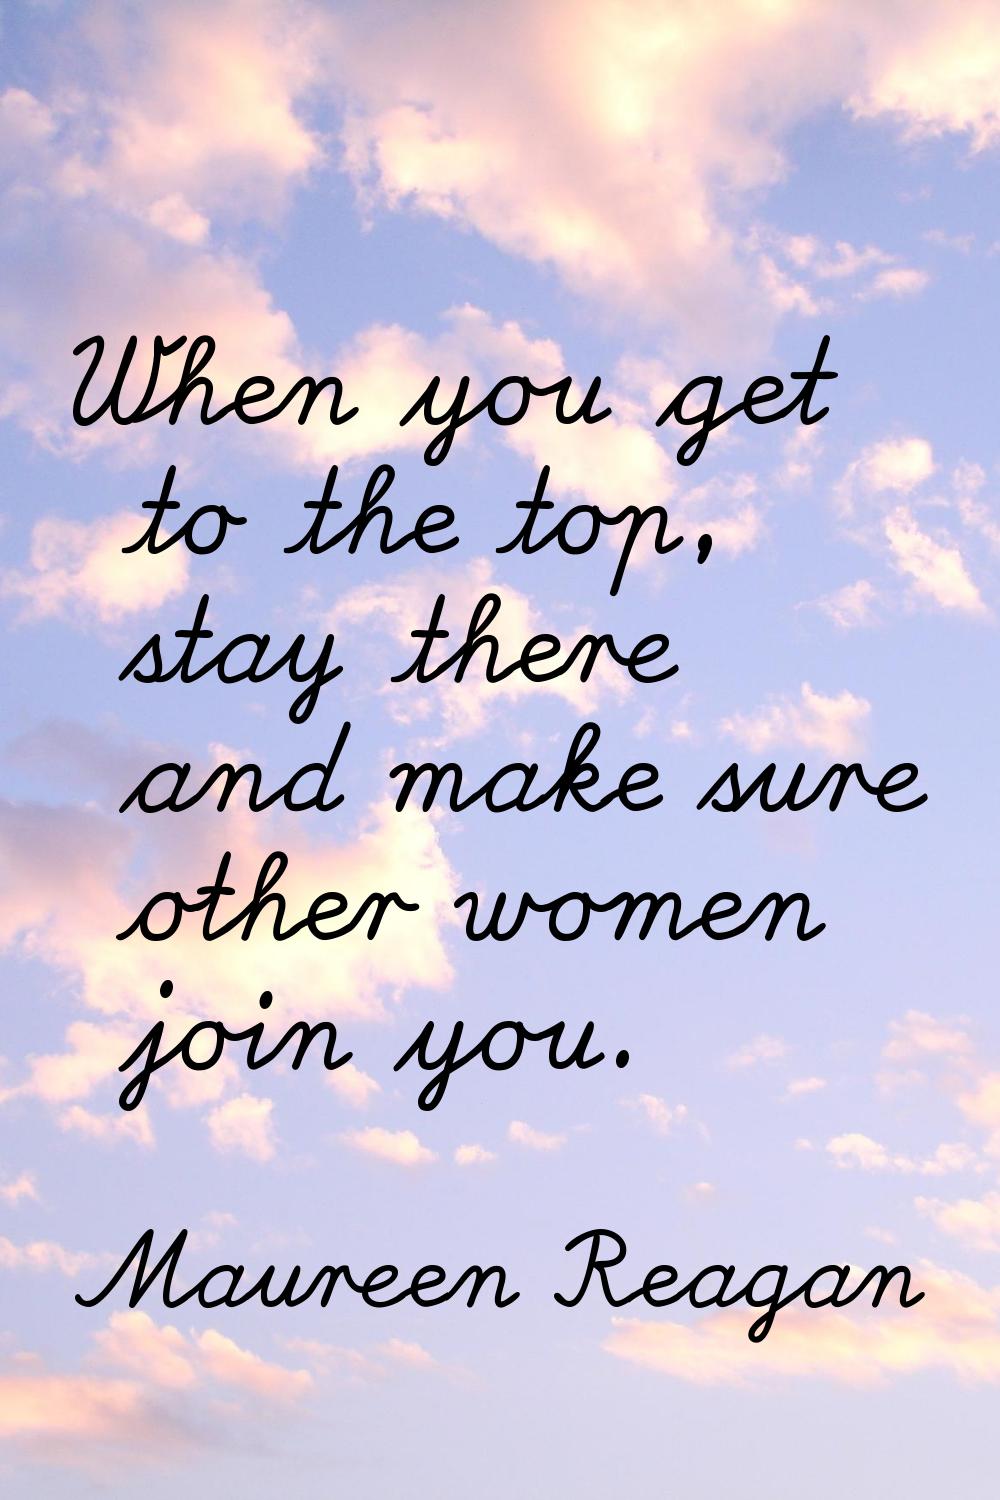 When you get to the top, stay there and make sure other women join you.